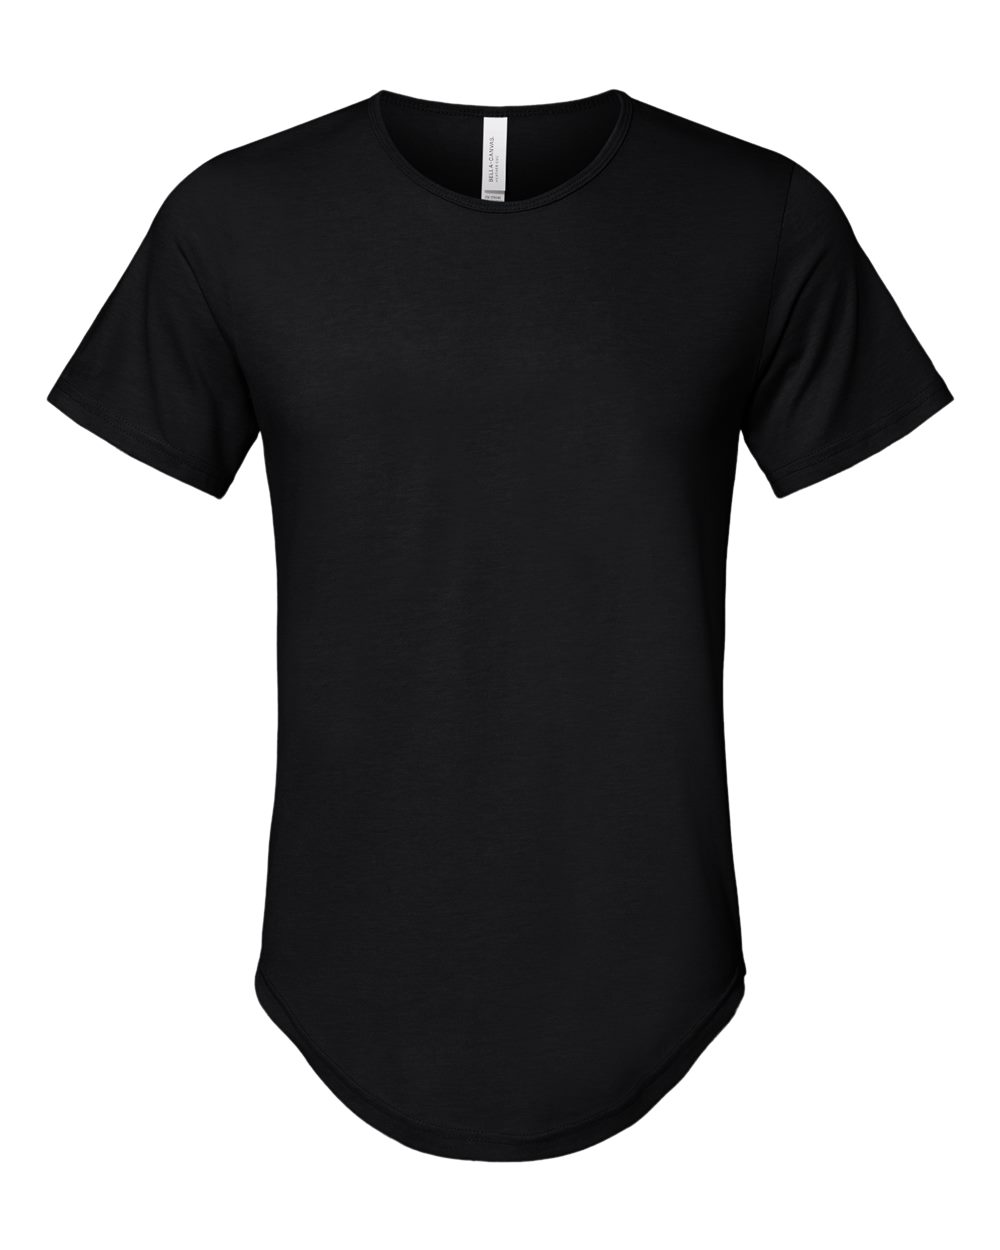 BELLA + CANVAS Jersey Curved Hem Tee - image 1 of 3